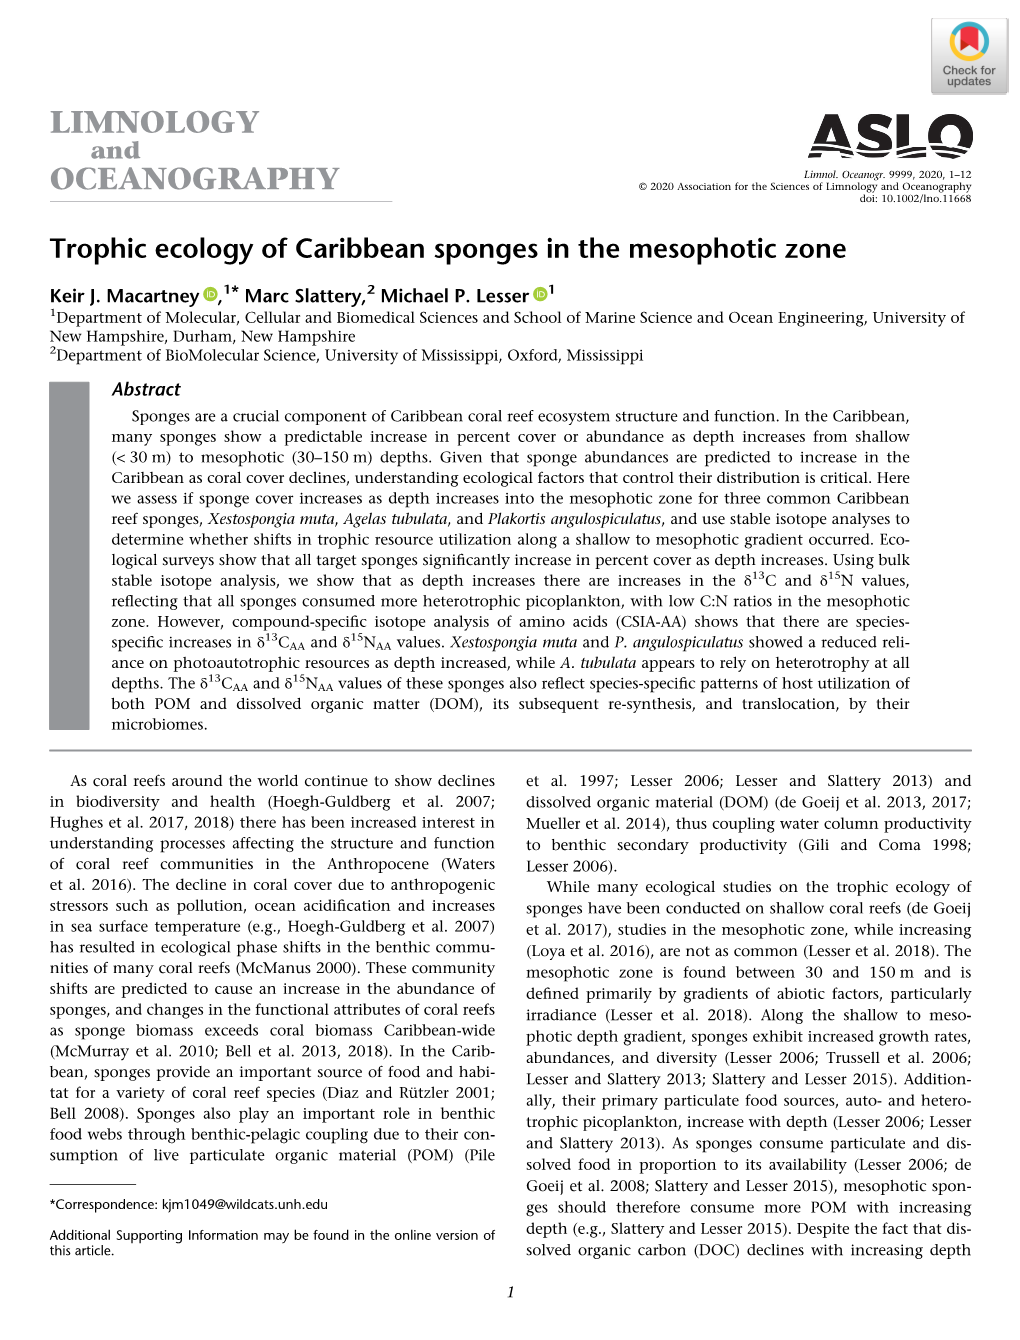 Trophic Ecology of Caribbean Sponges in the Mesophotic Zone